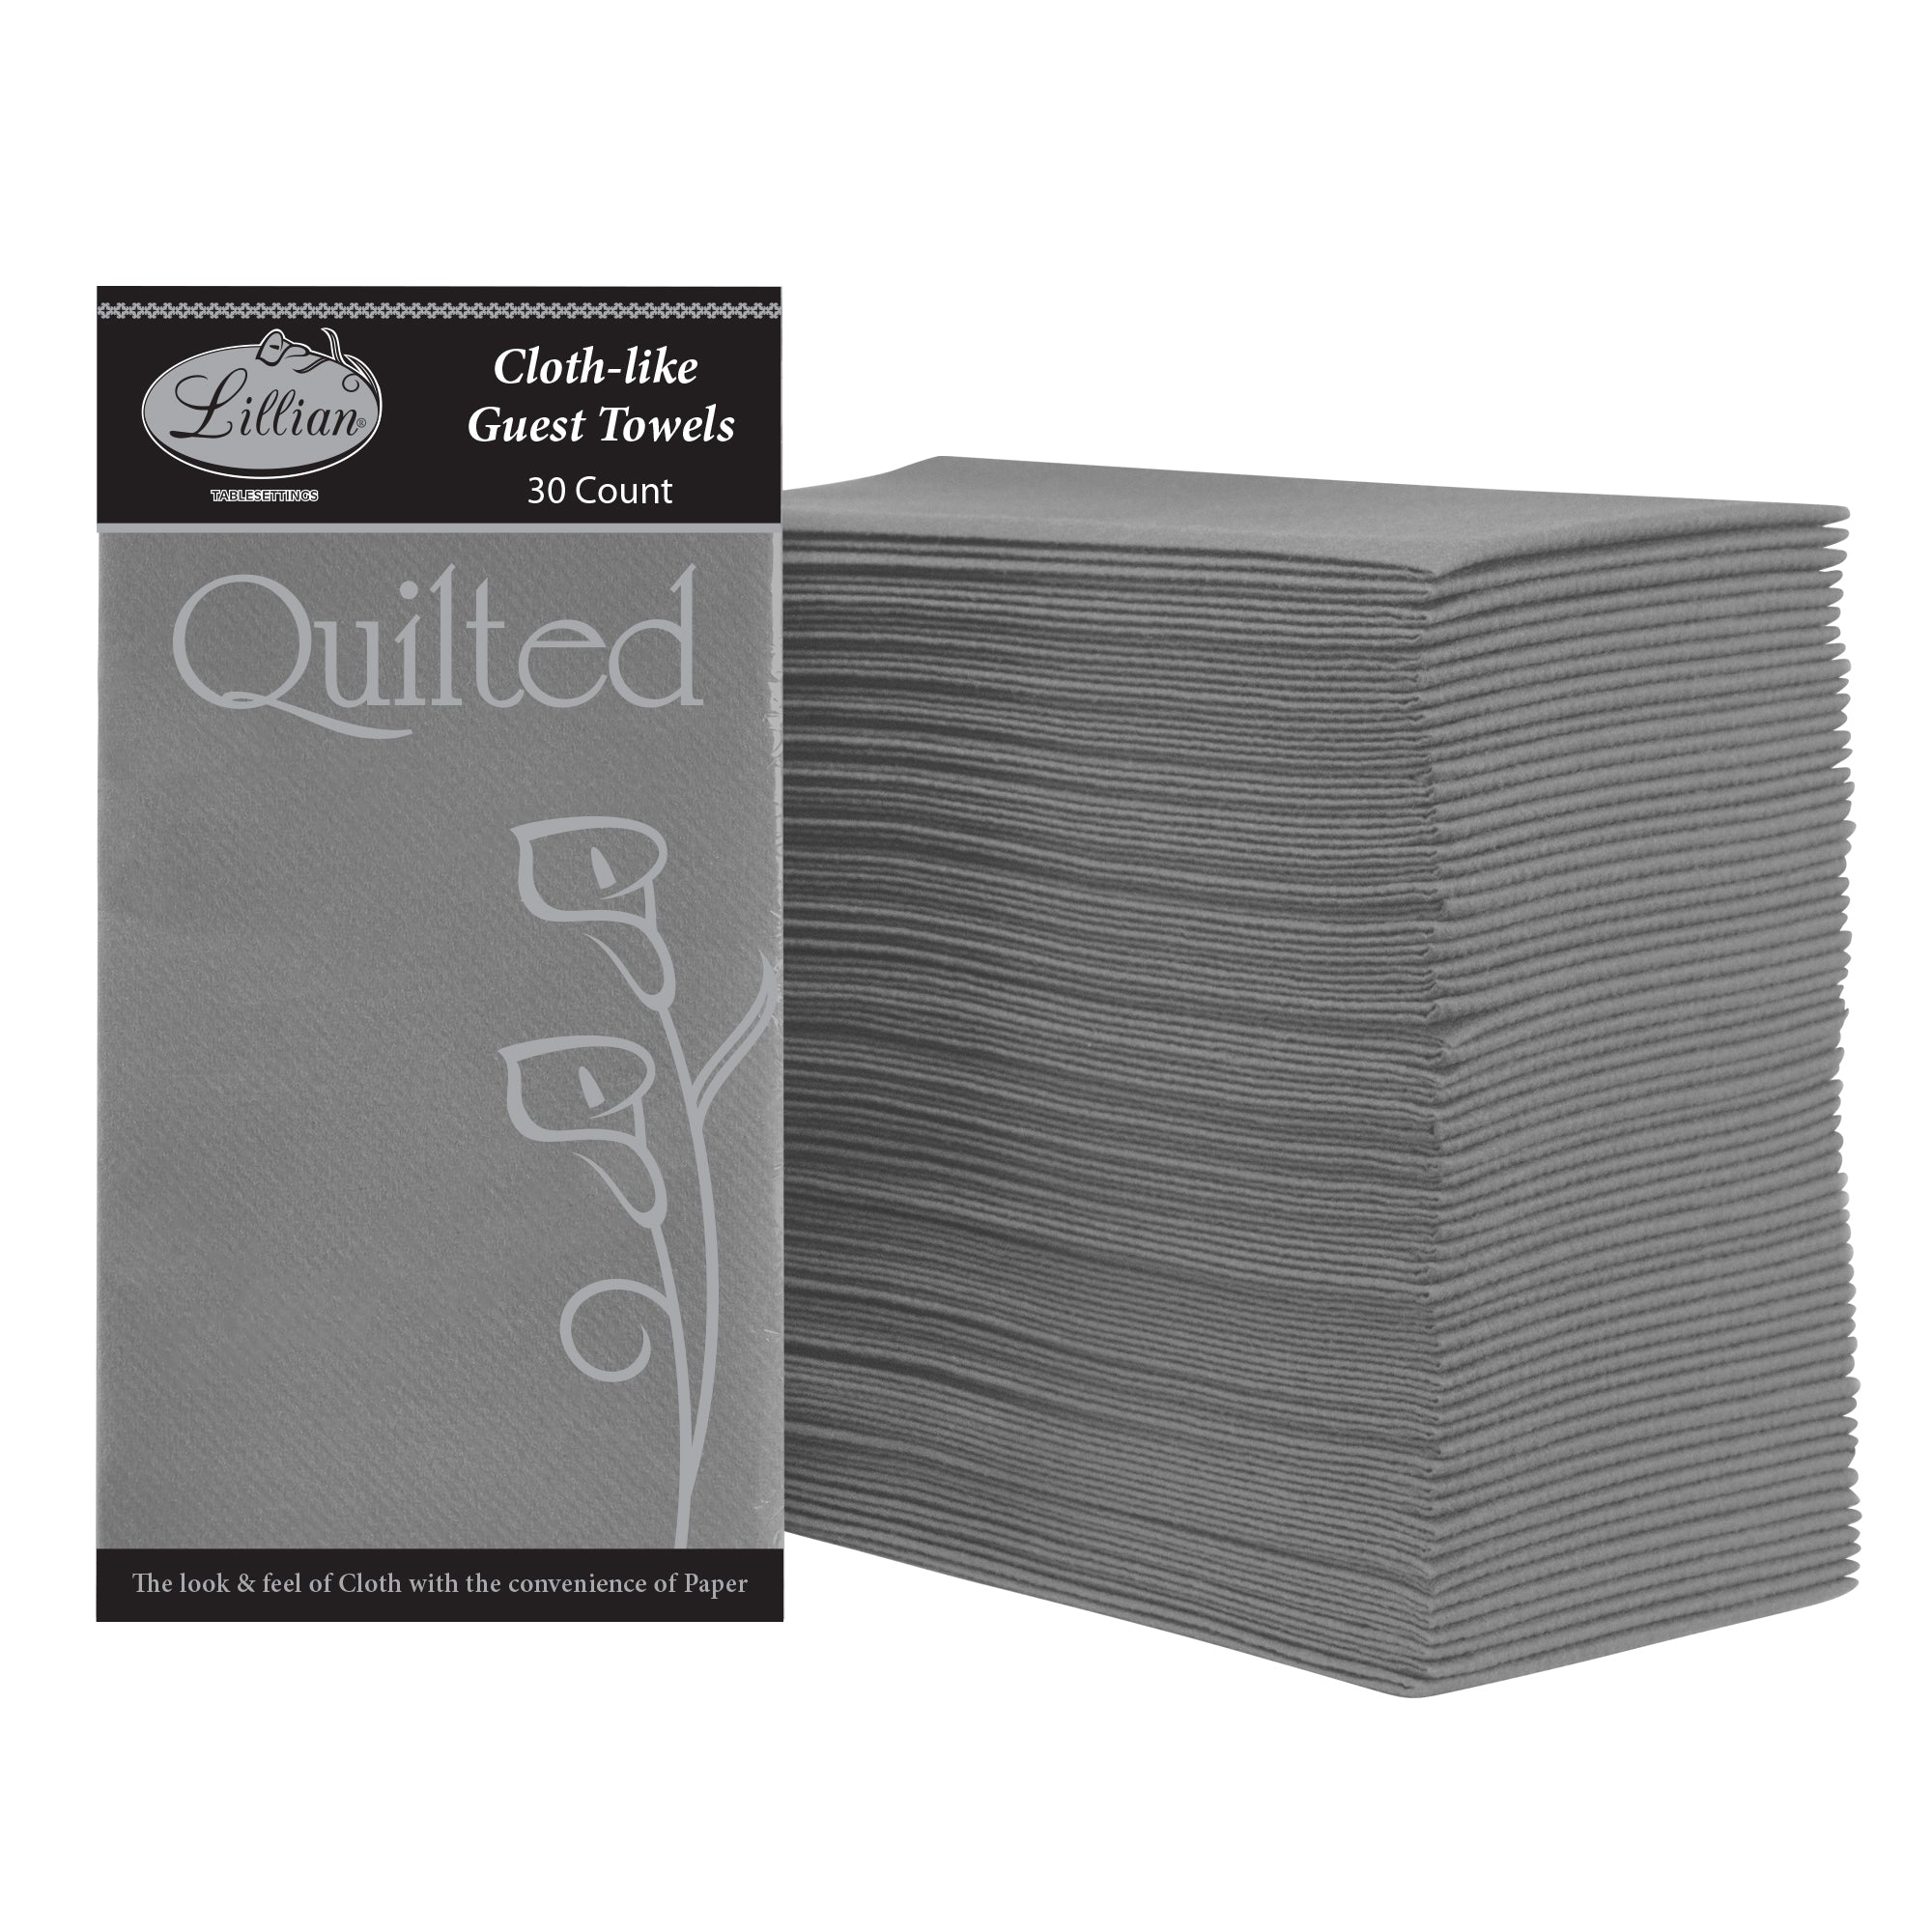 Quilted Premium Paper Cloth-Like Guest Towel